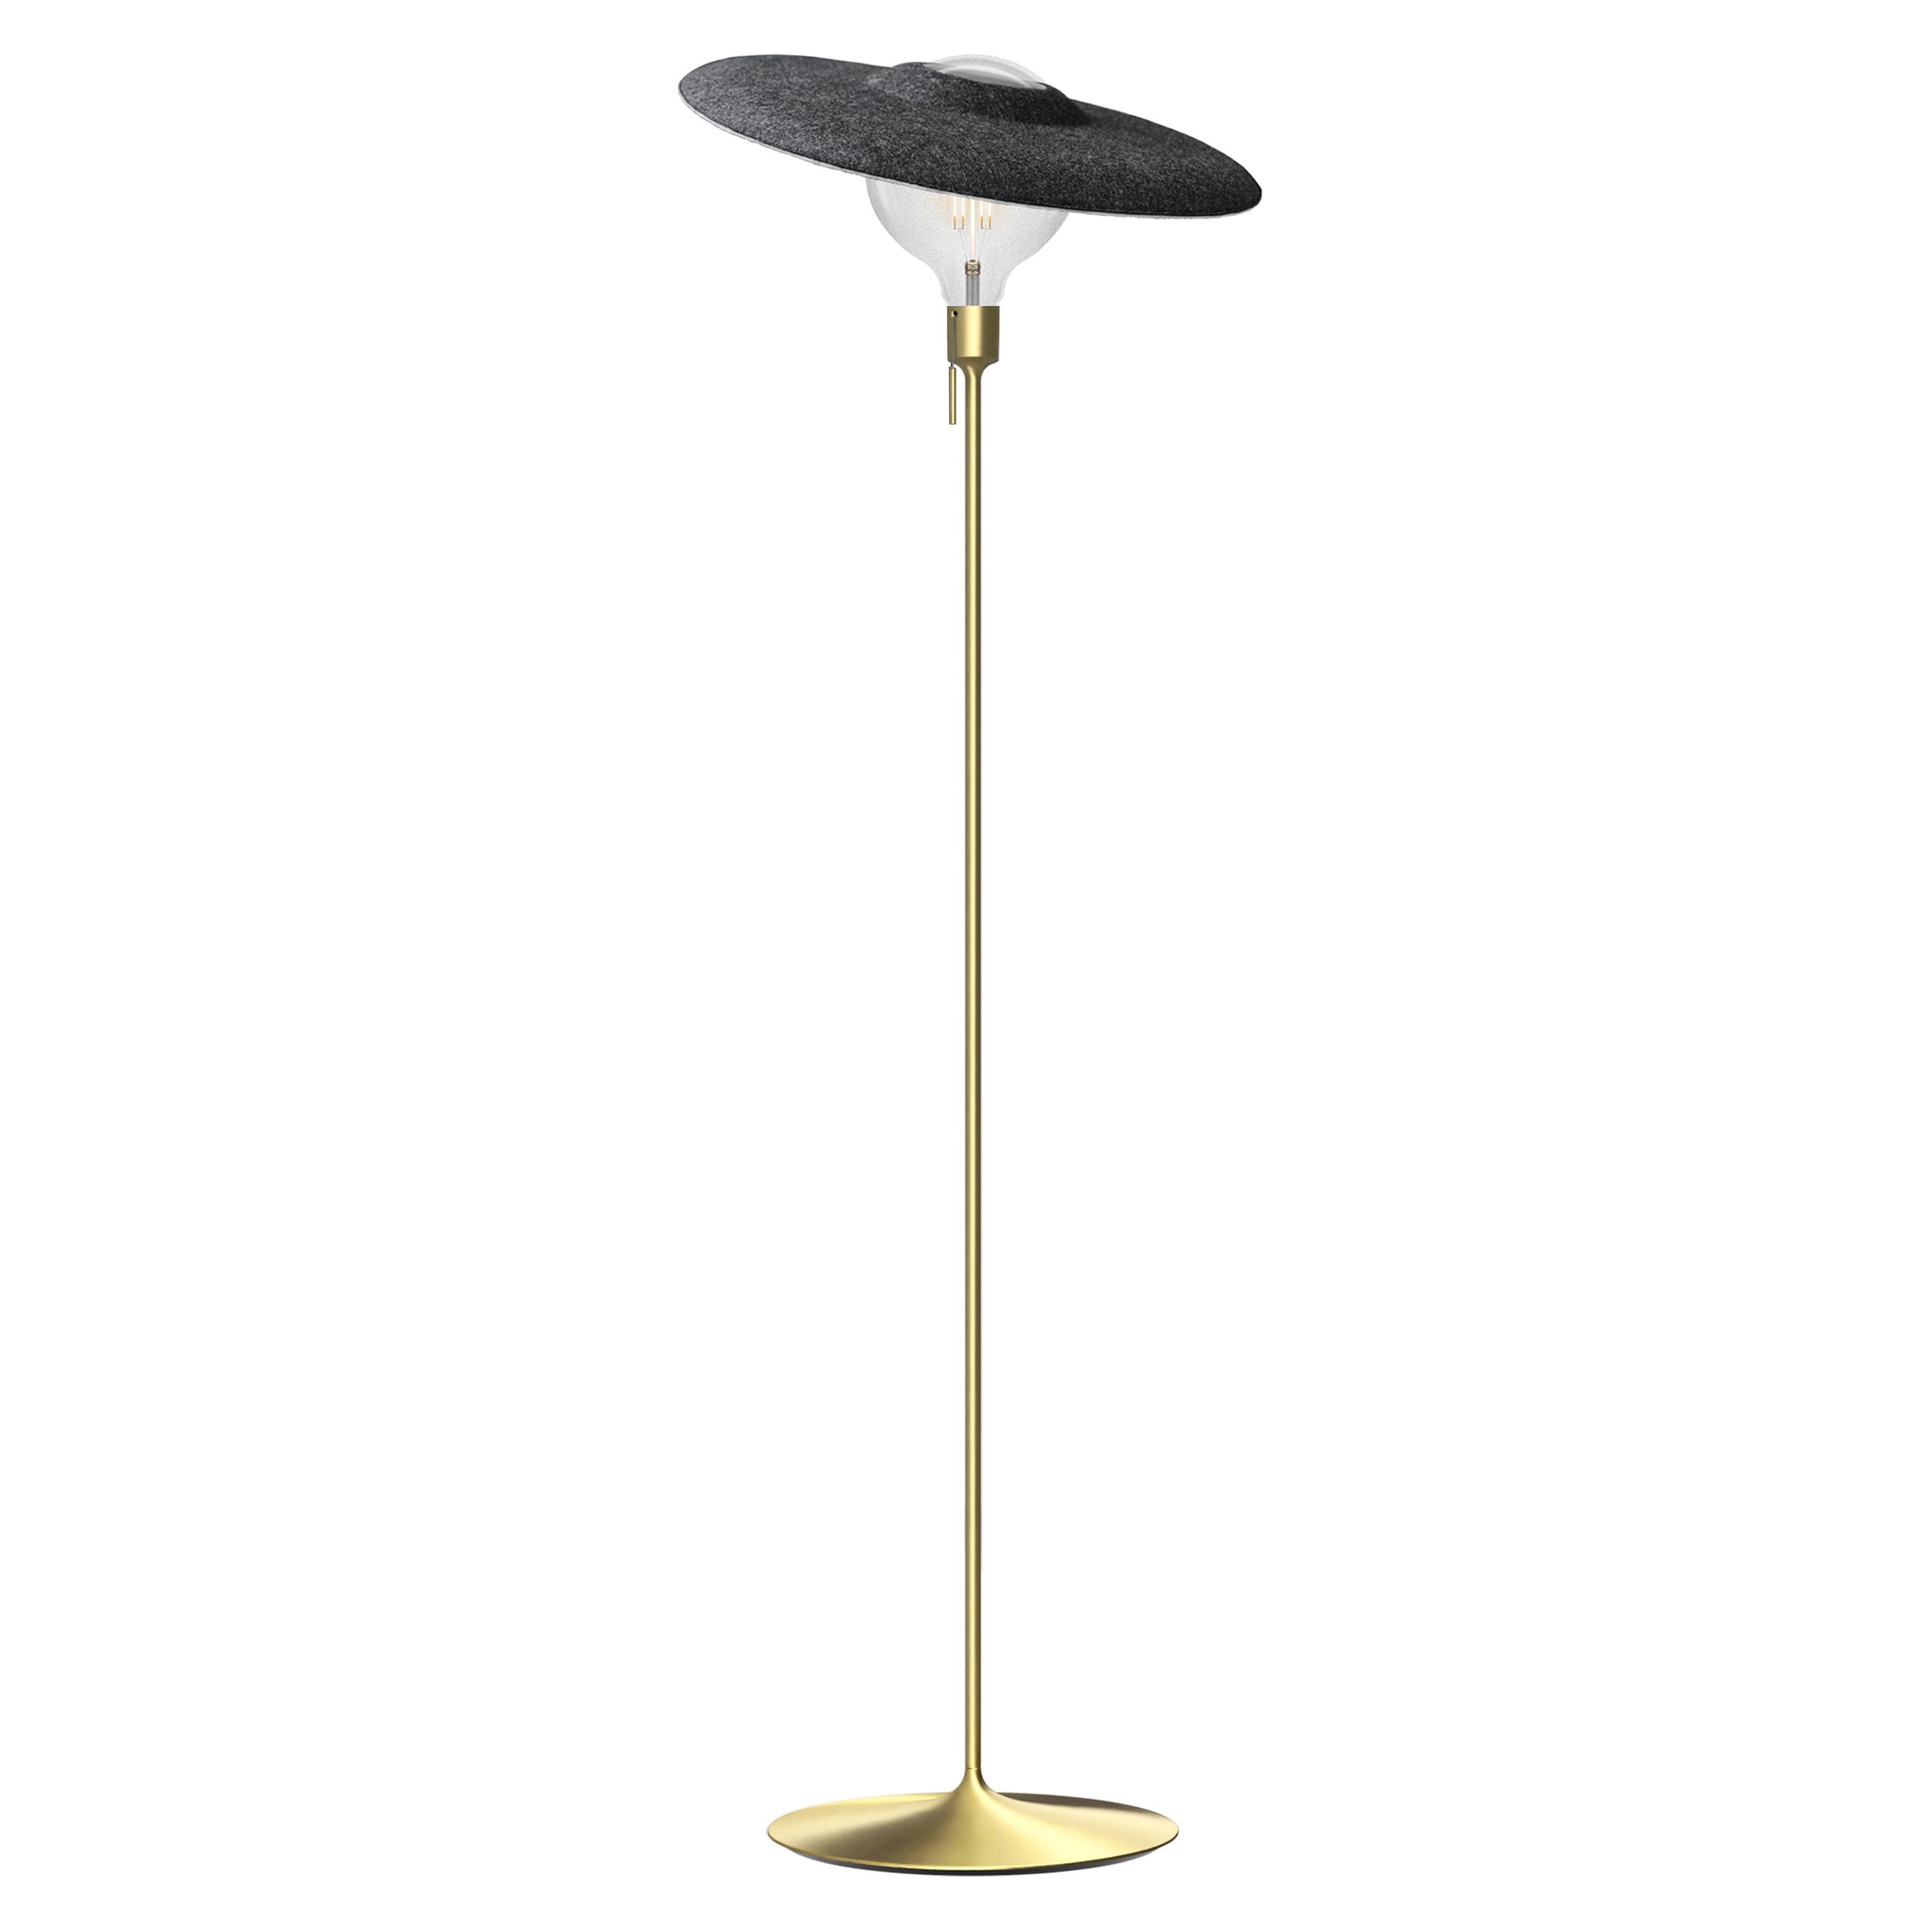 Shade Champagne Floor Lamp: Brushed Brass + With Bulb (3 W)